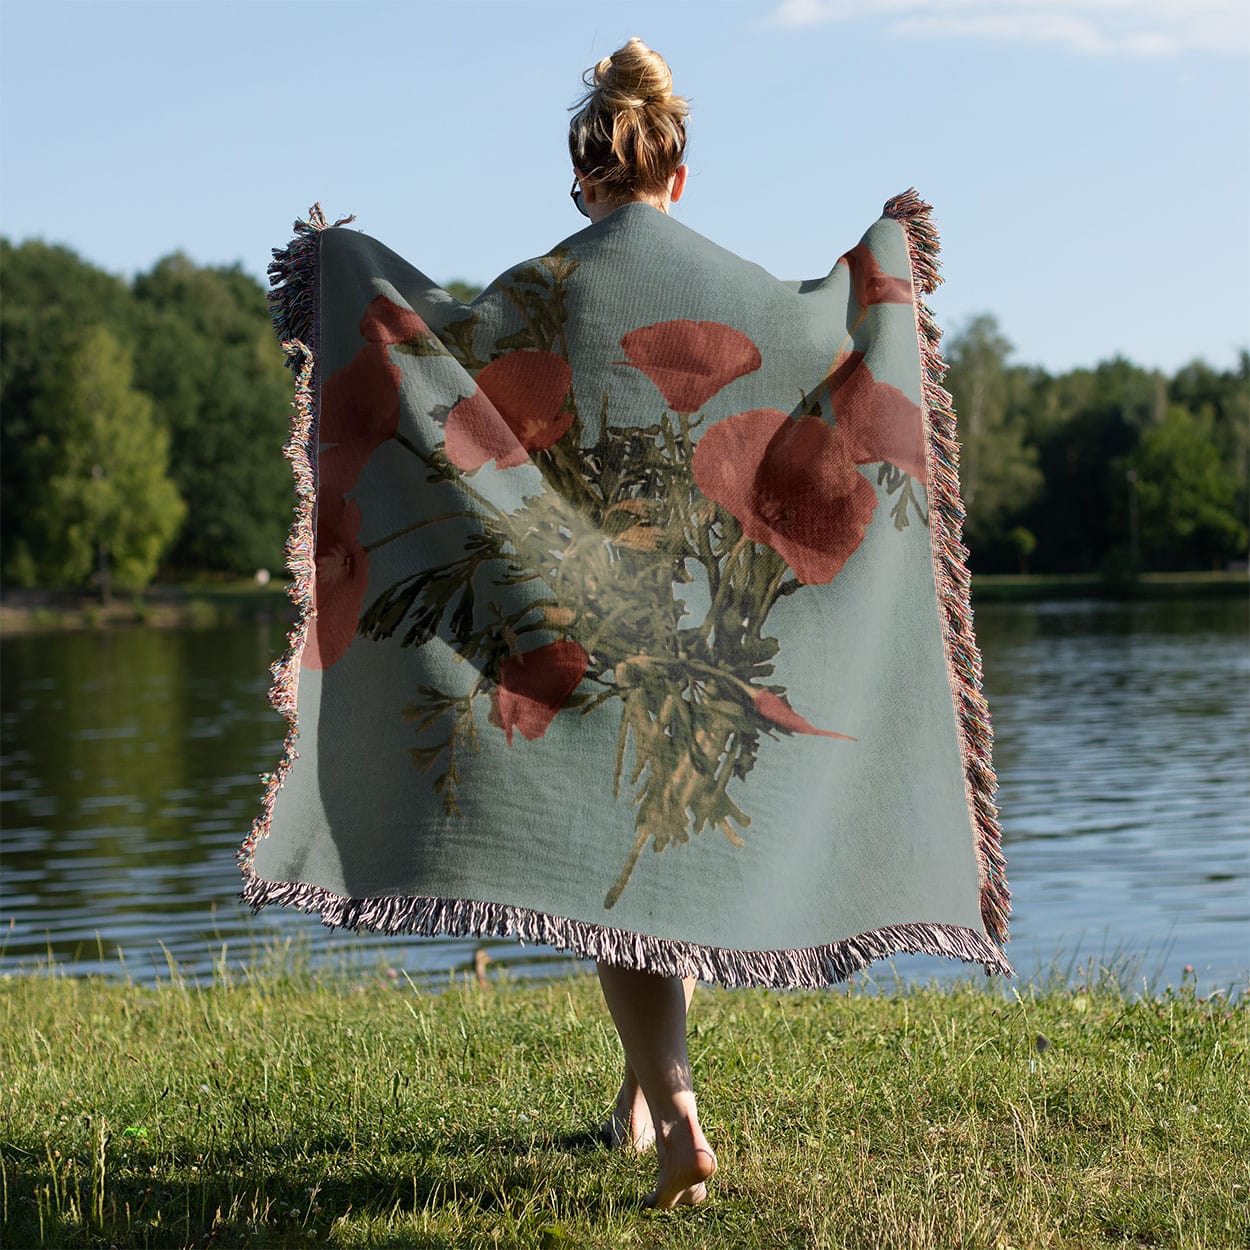 Vintage Floral Woven Blanket Held on a Woman's Back Outside